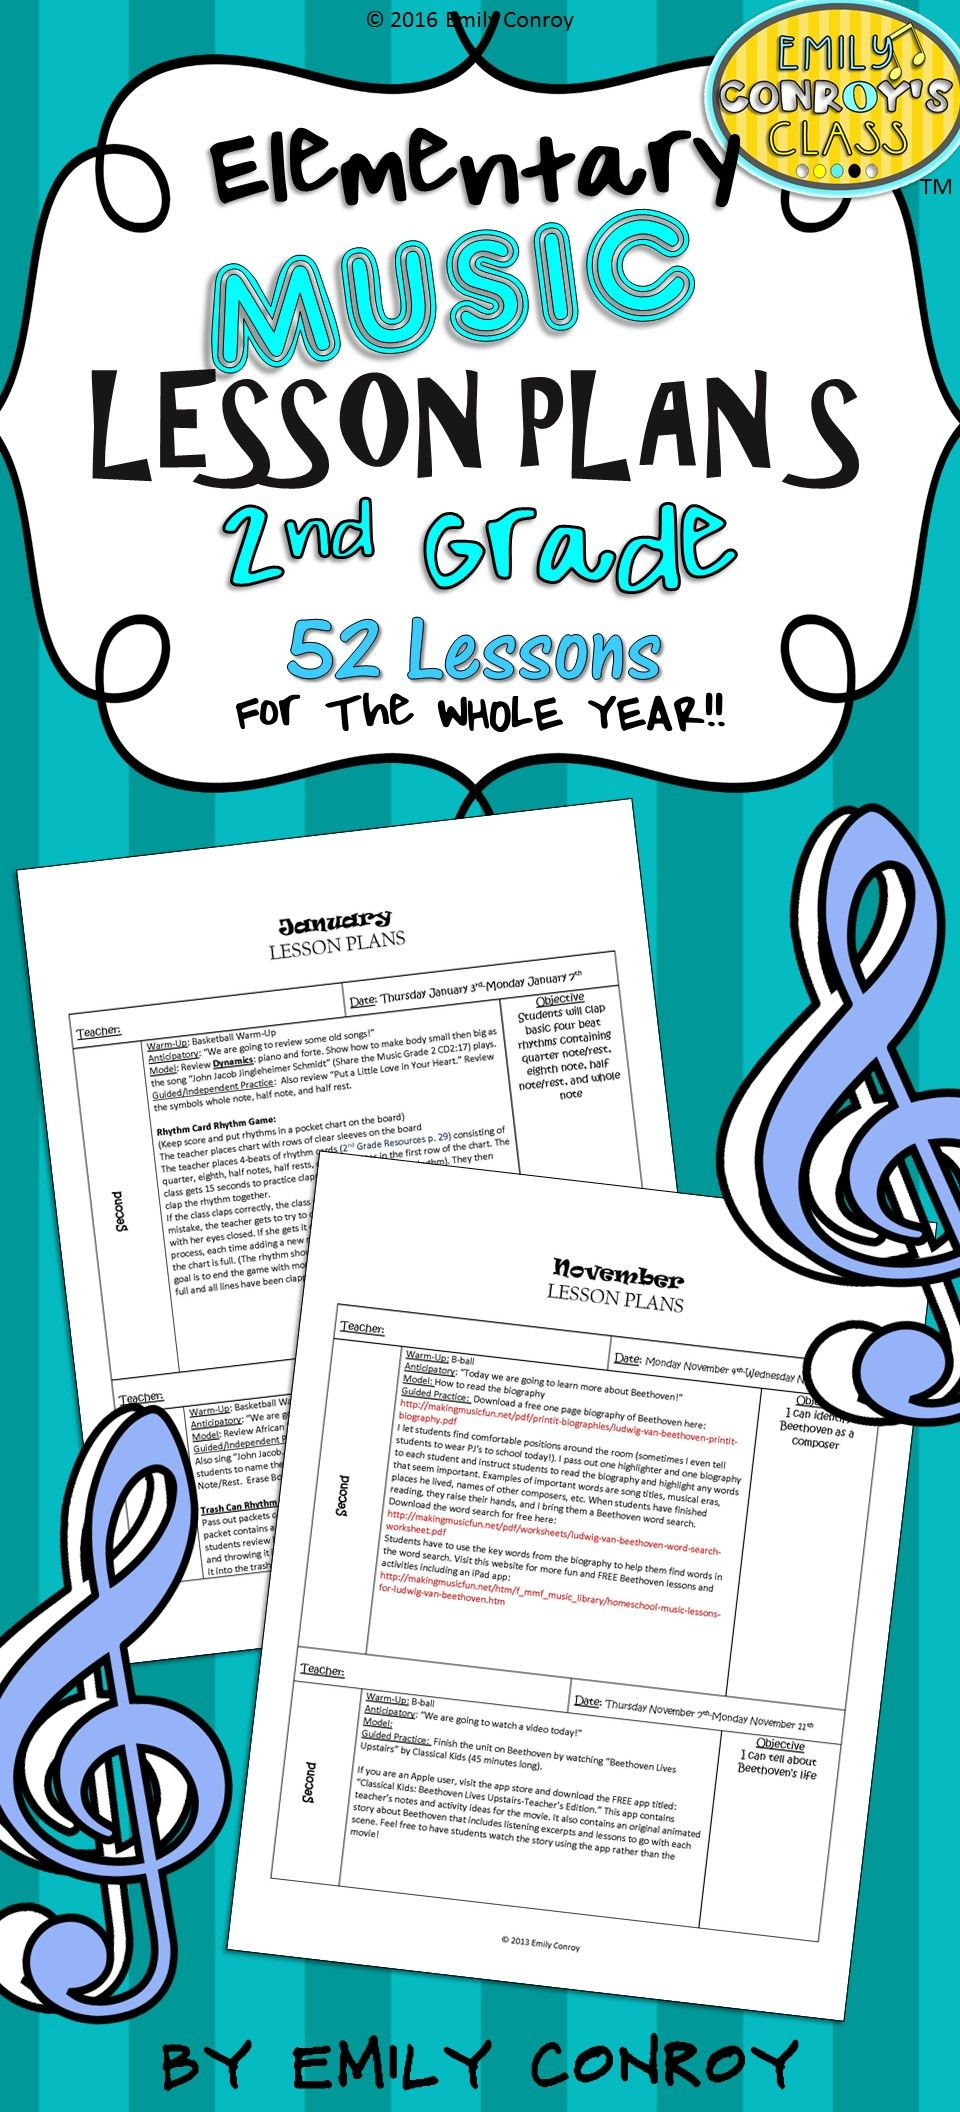 Second Grade Music Lessons Plans-These Plans Are Creative